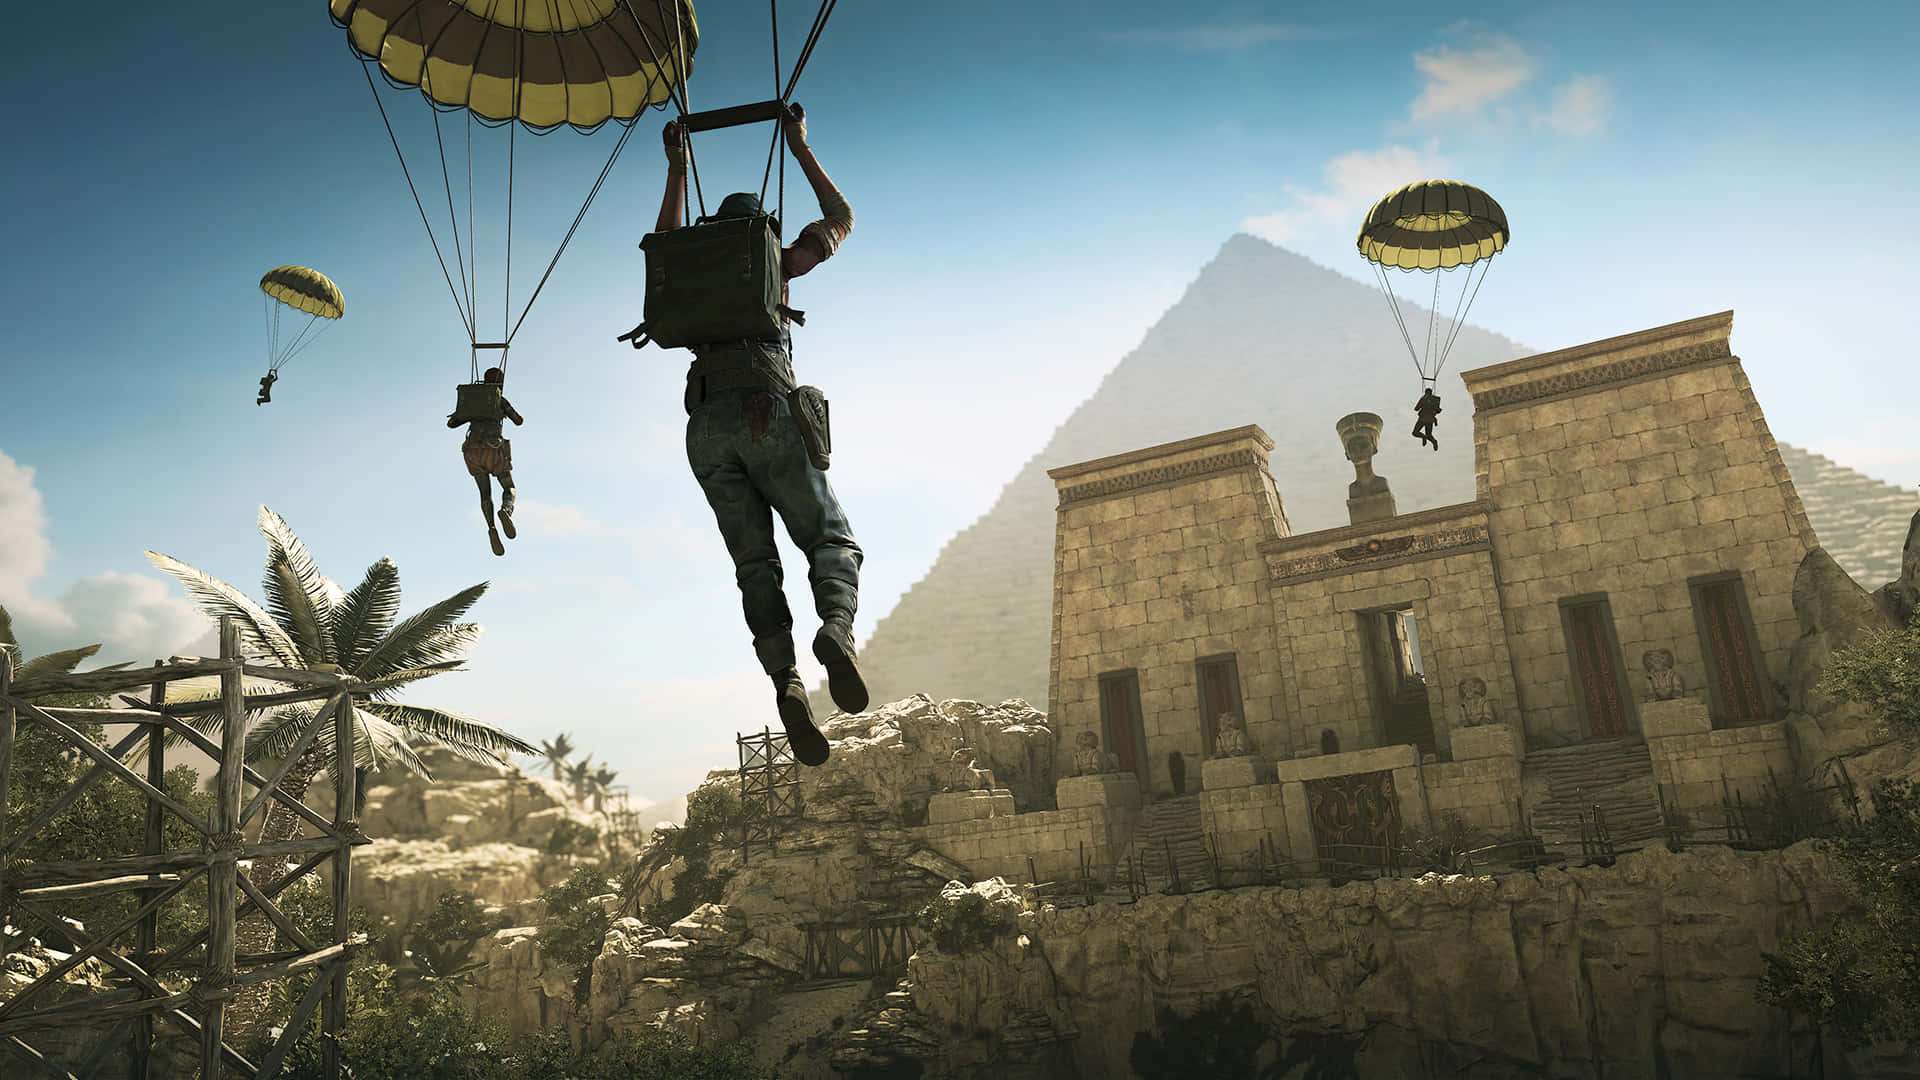 A Man Is Flying With Parachute Over A Pyramid